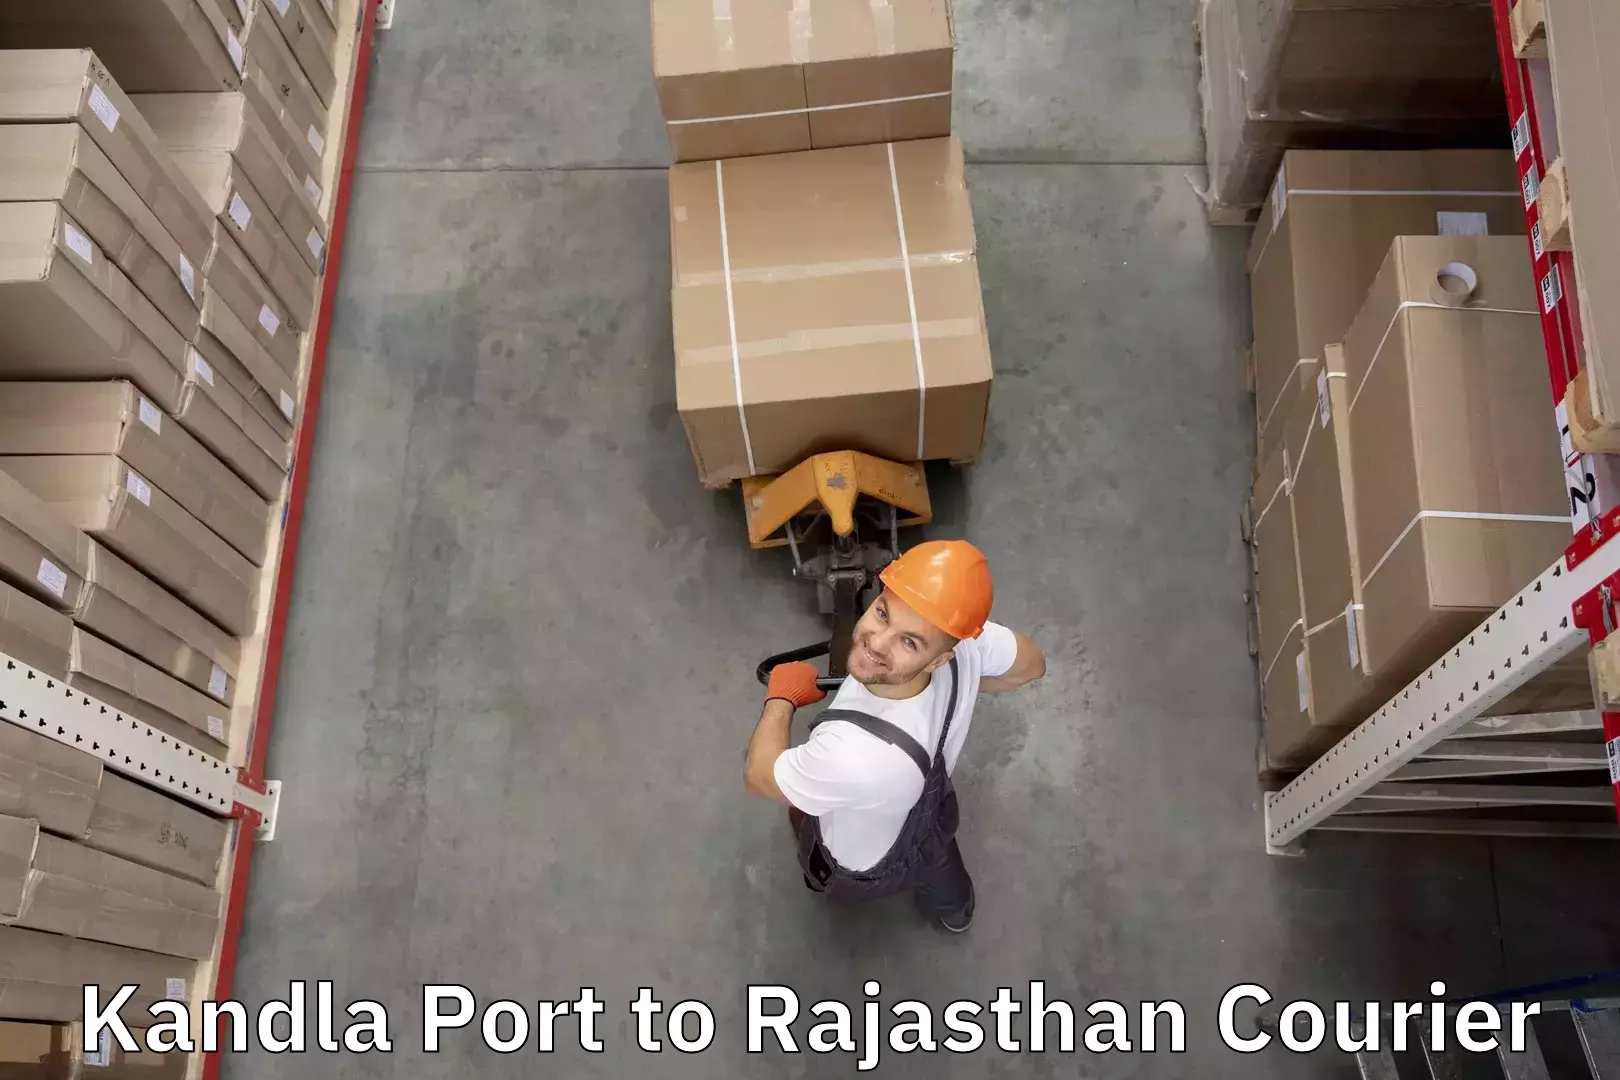 Luggage transport consultancy Kandla Port to Dholpur